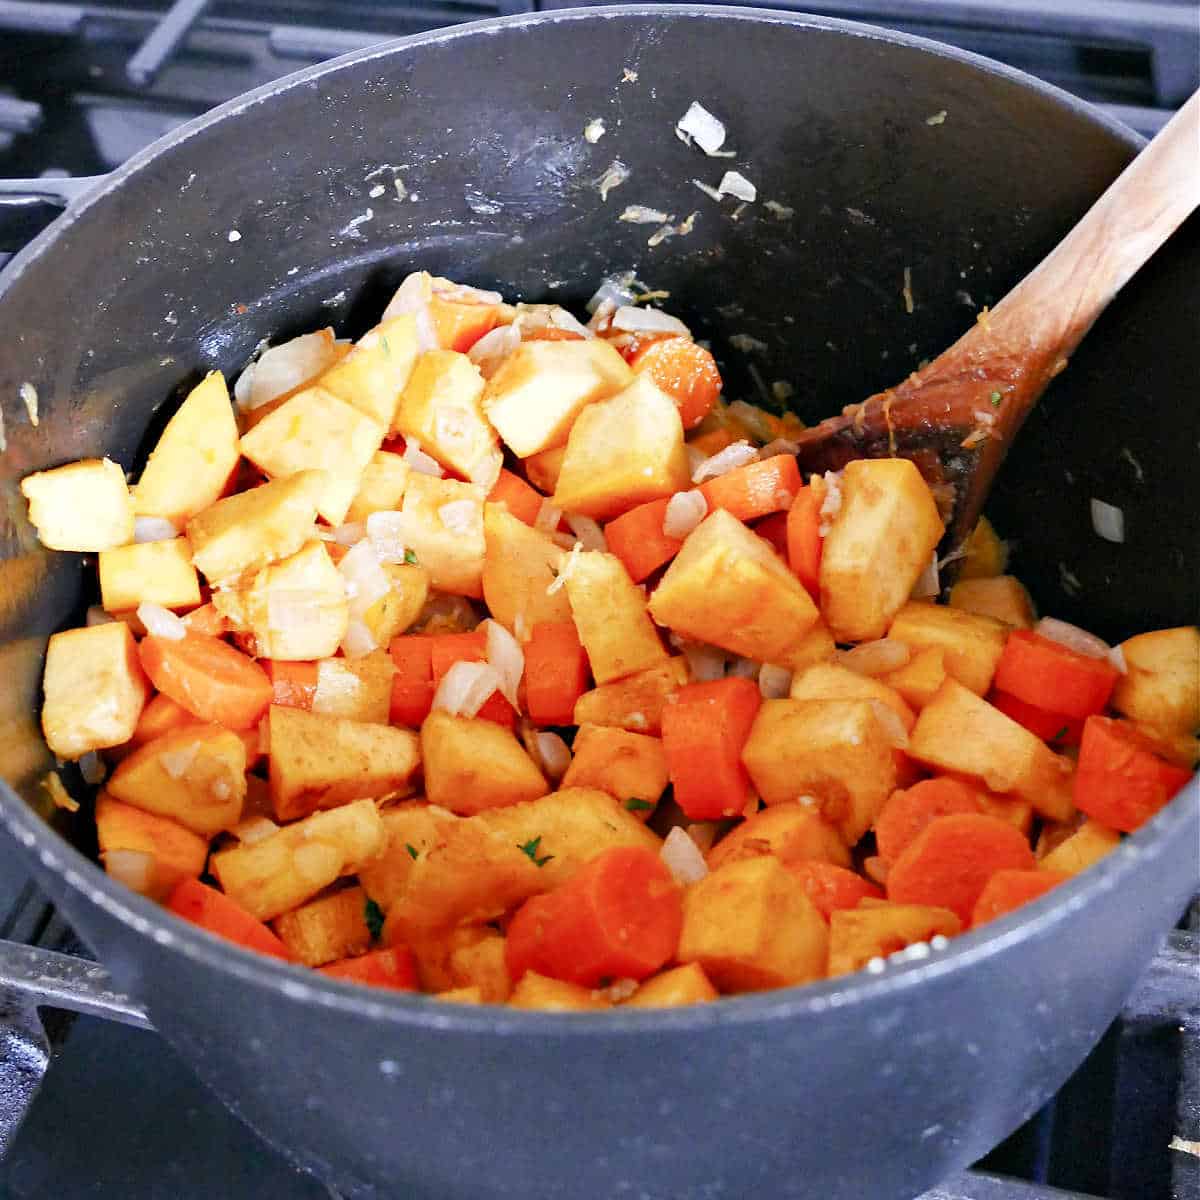 cubed carrot and pumpkin tossed in spices and cooking in a pot on a stove